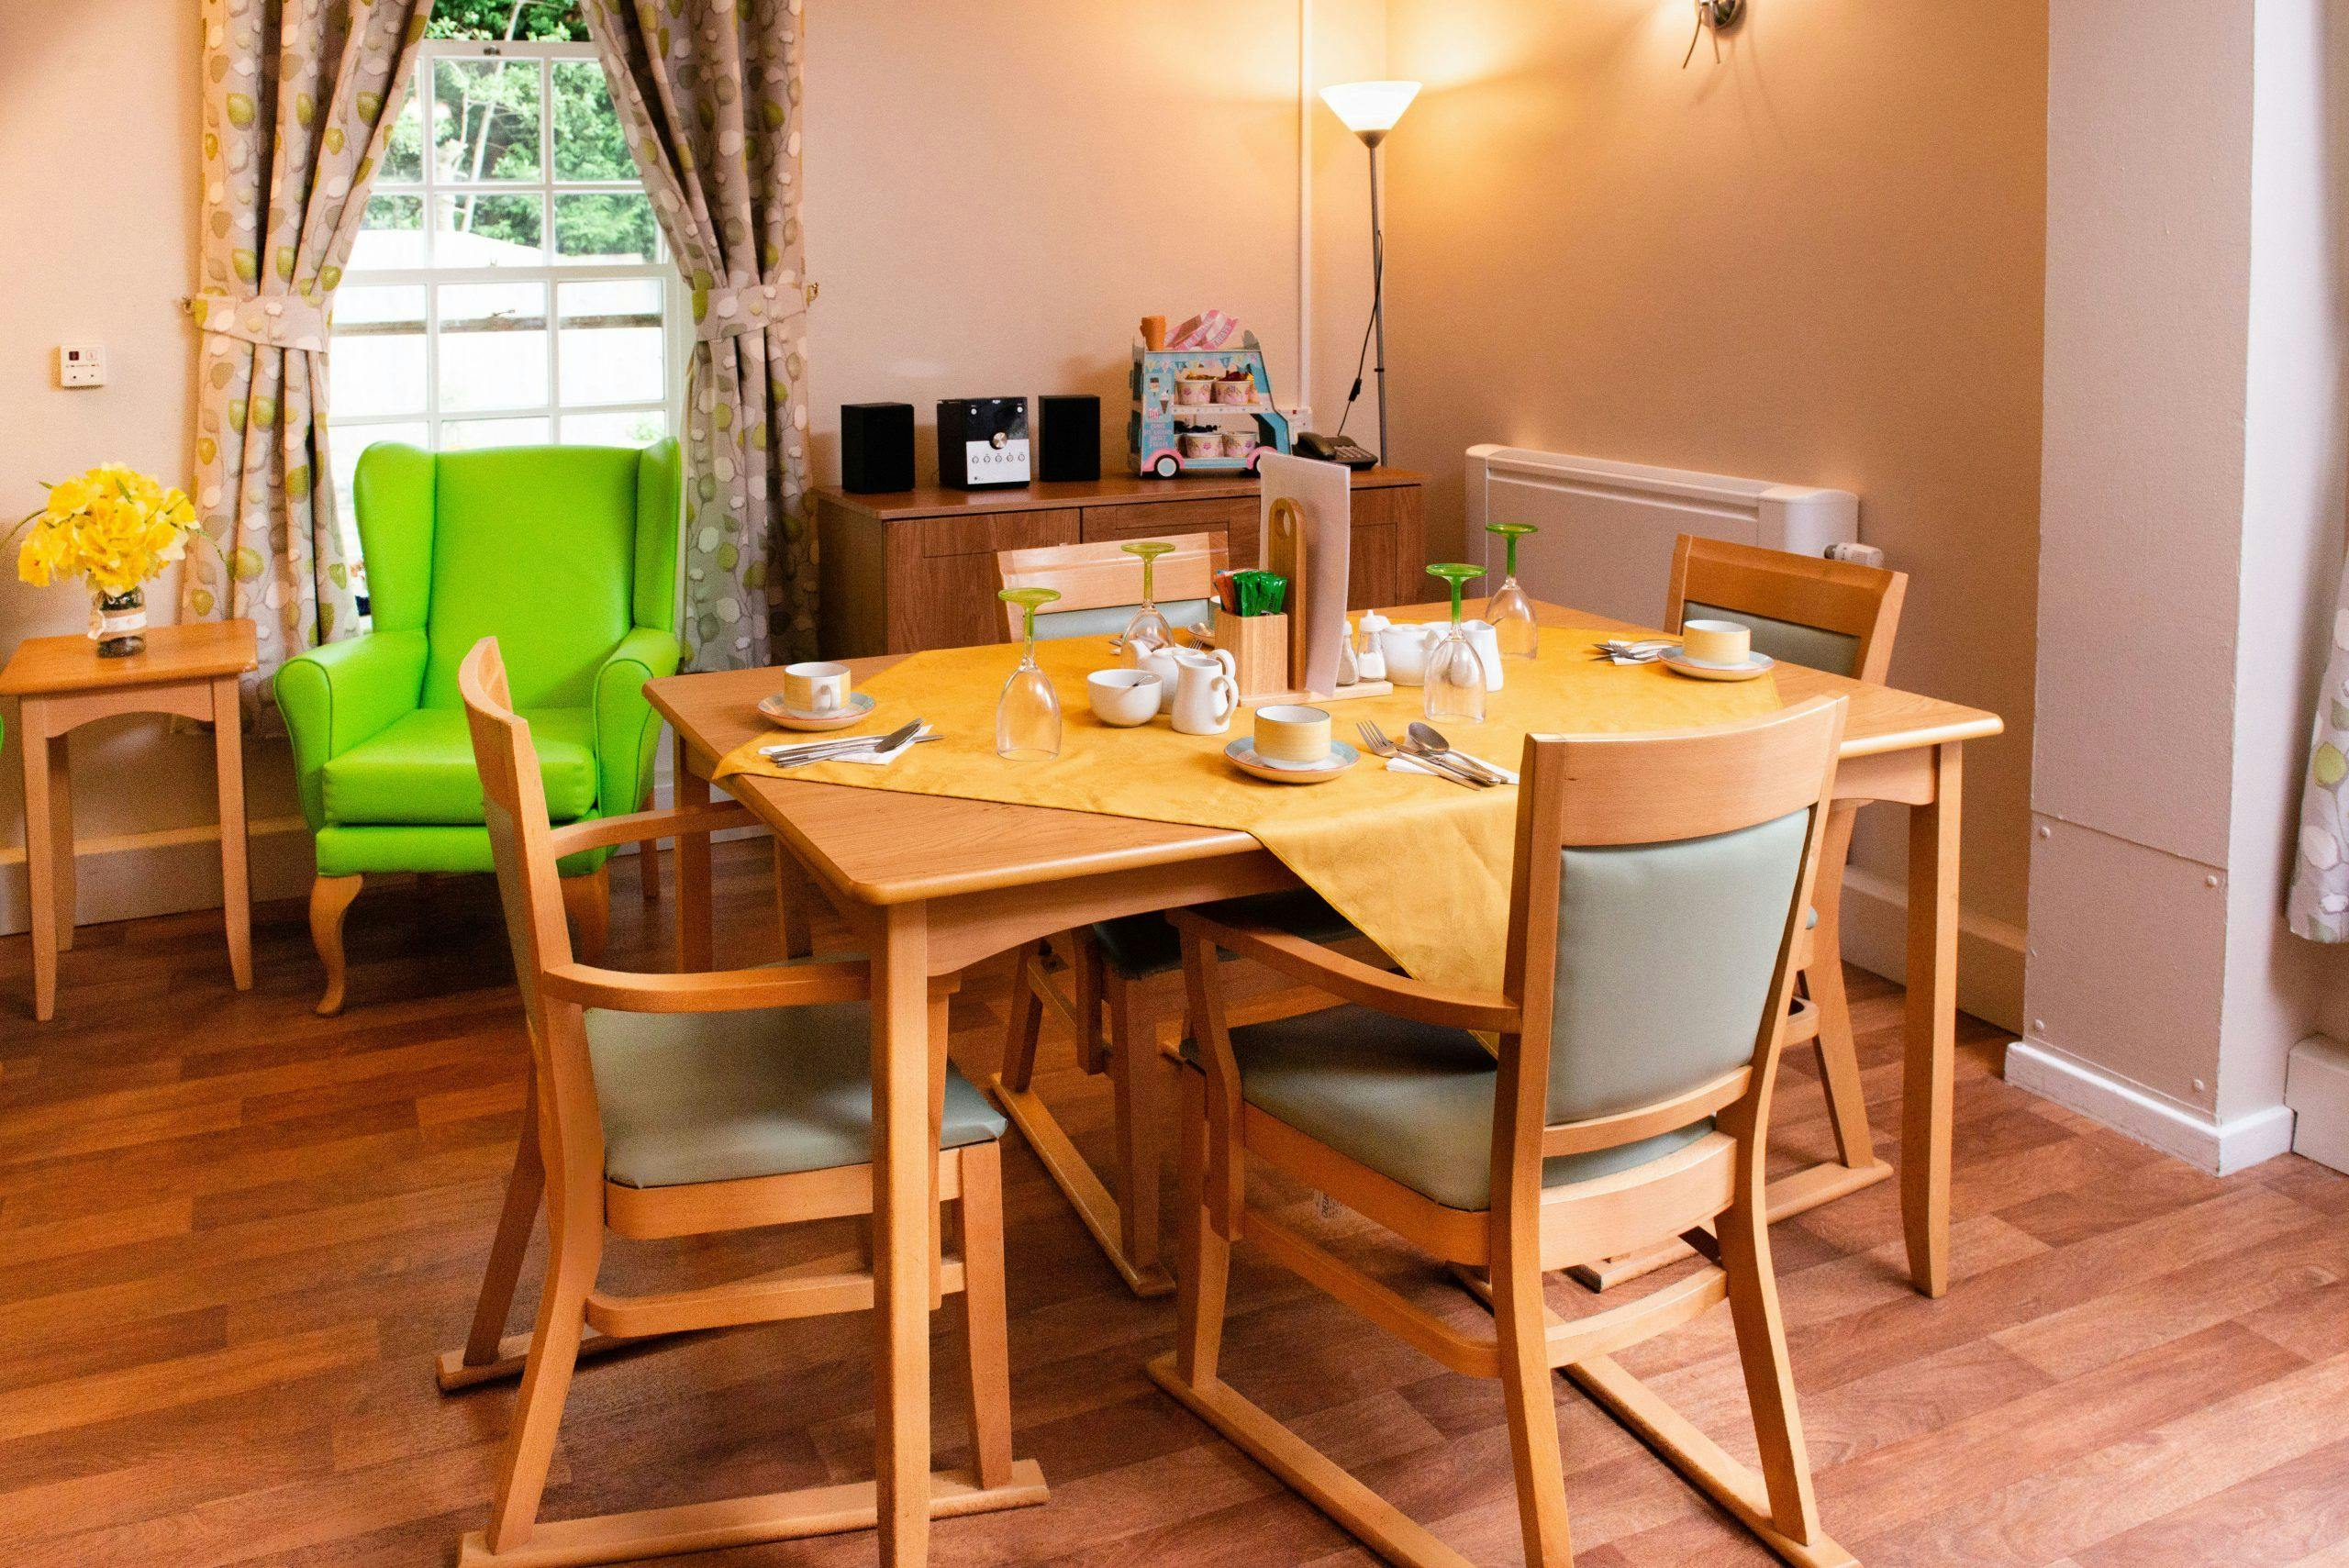 Dining Area of Smalley Hall Care Home in Ilkeston, Derbyshire